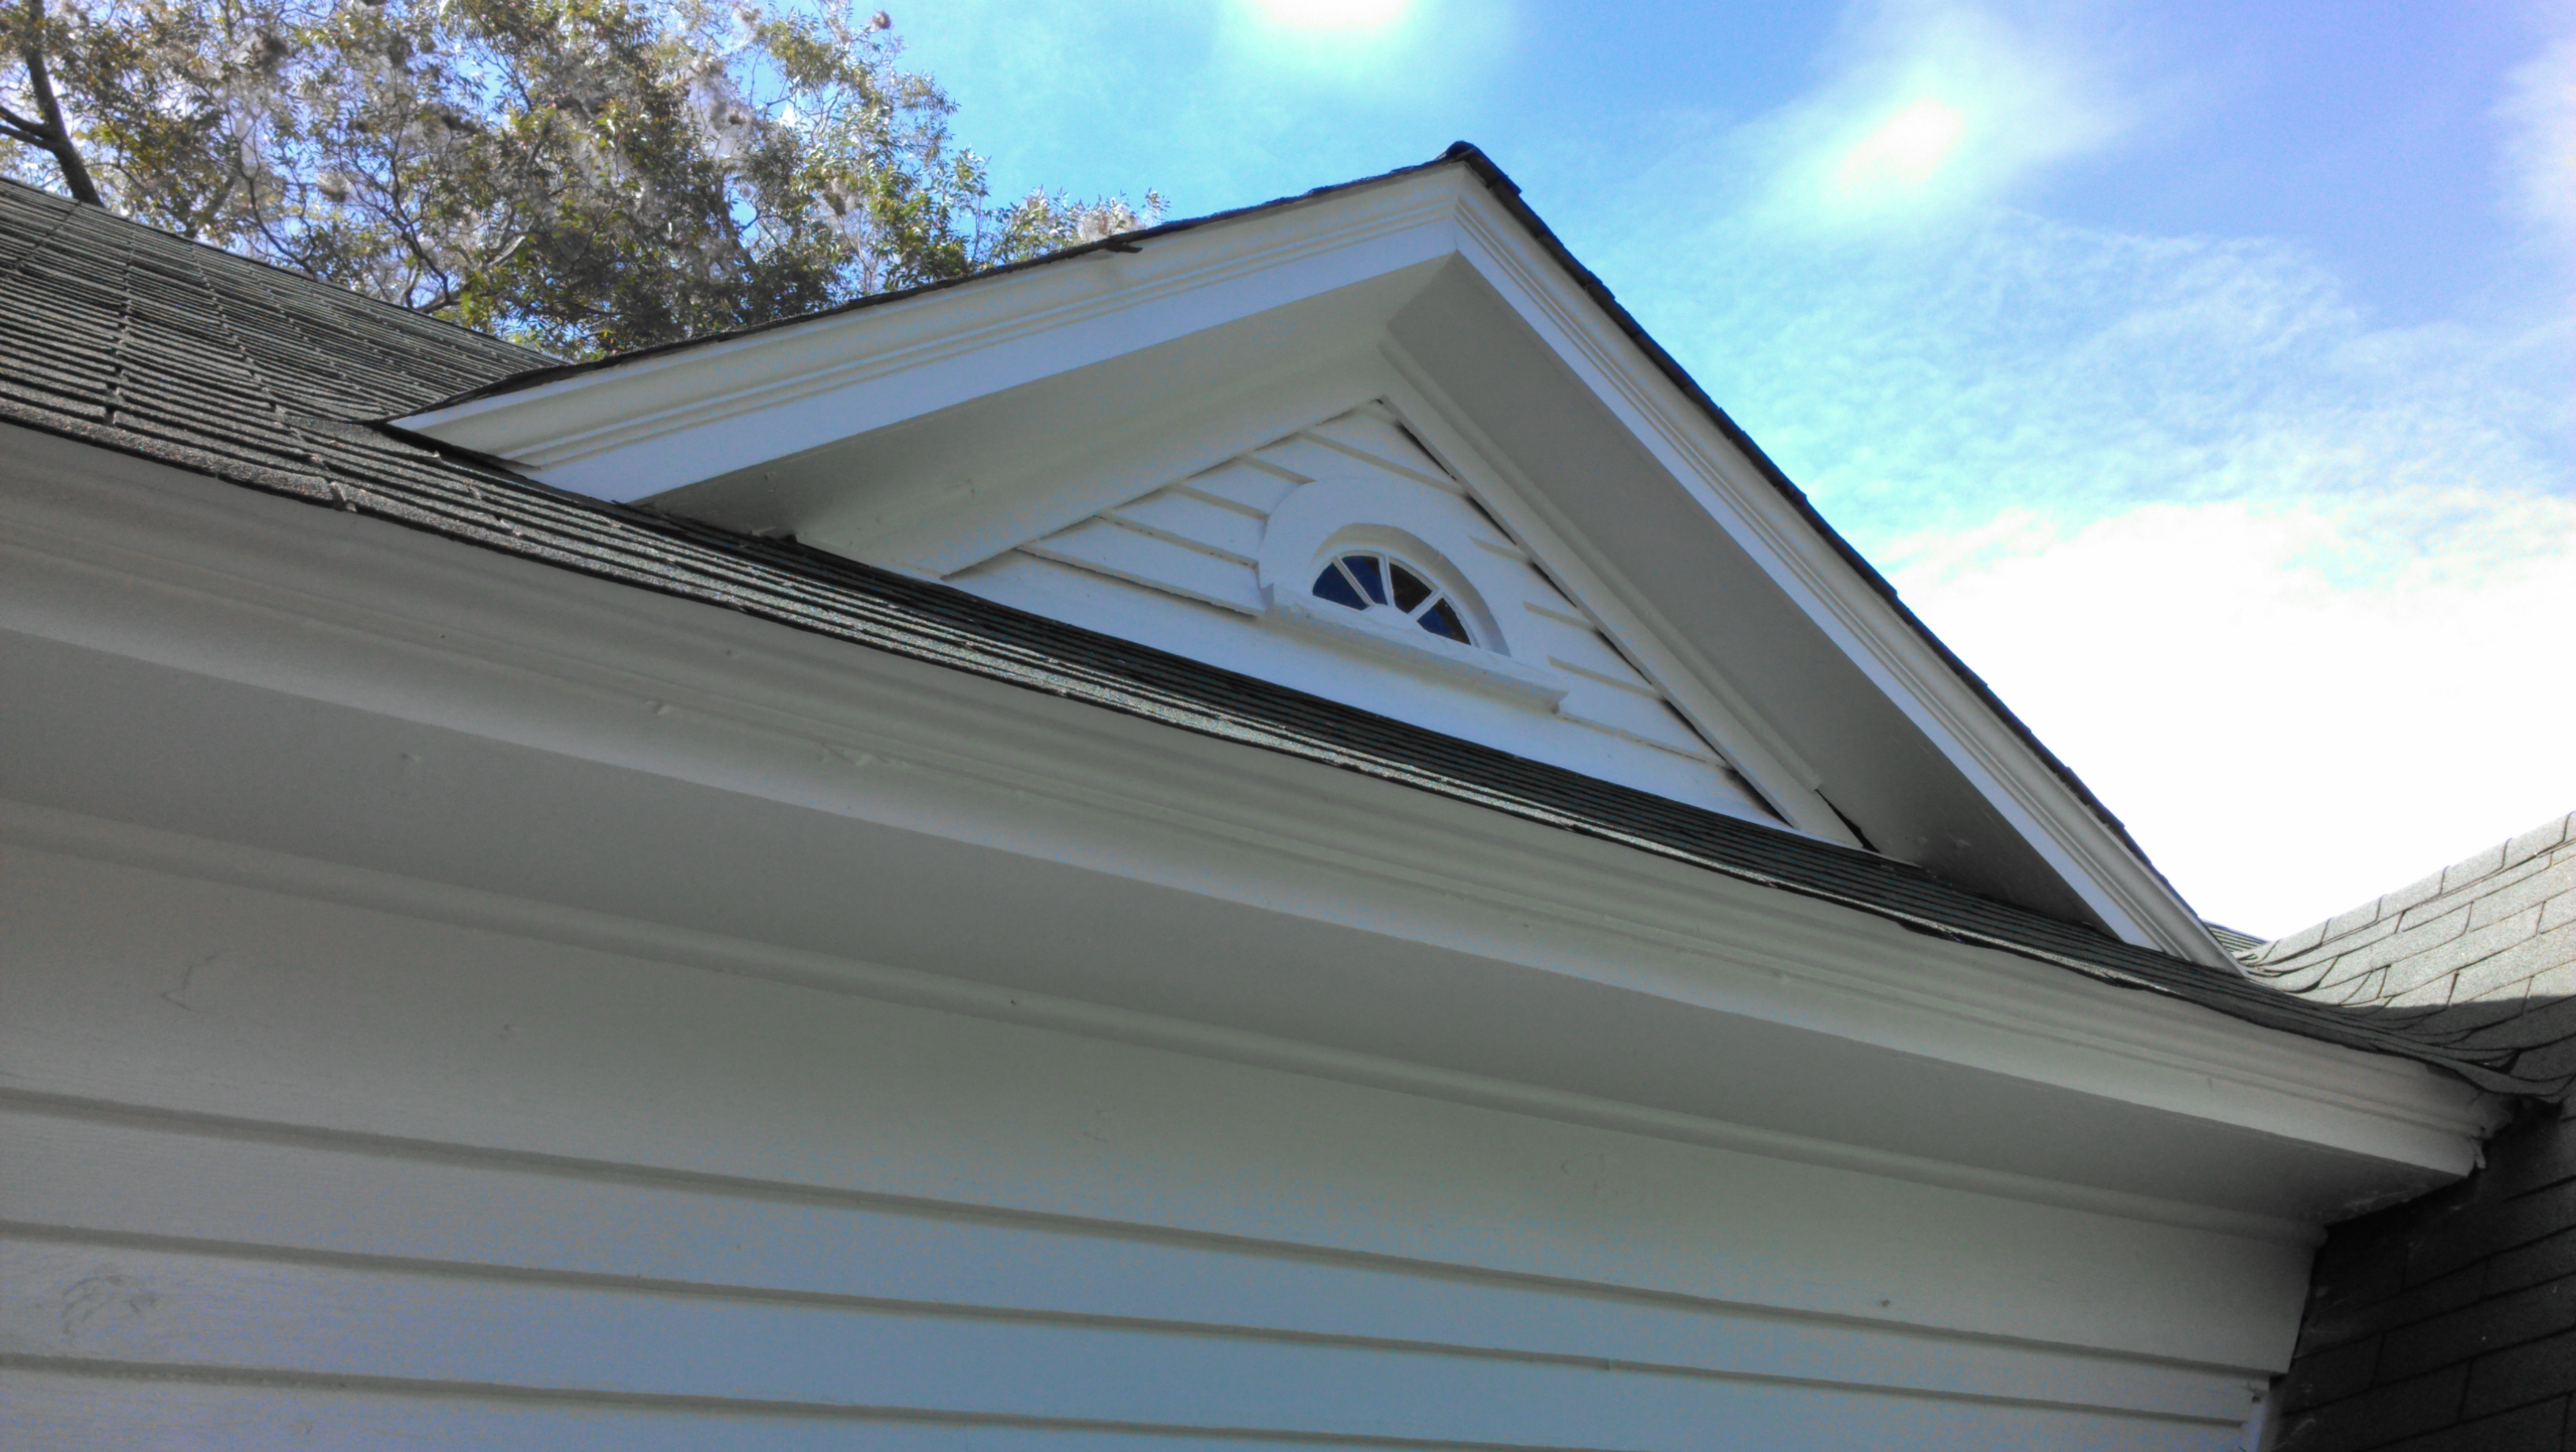 Exterior Painting Raleigh